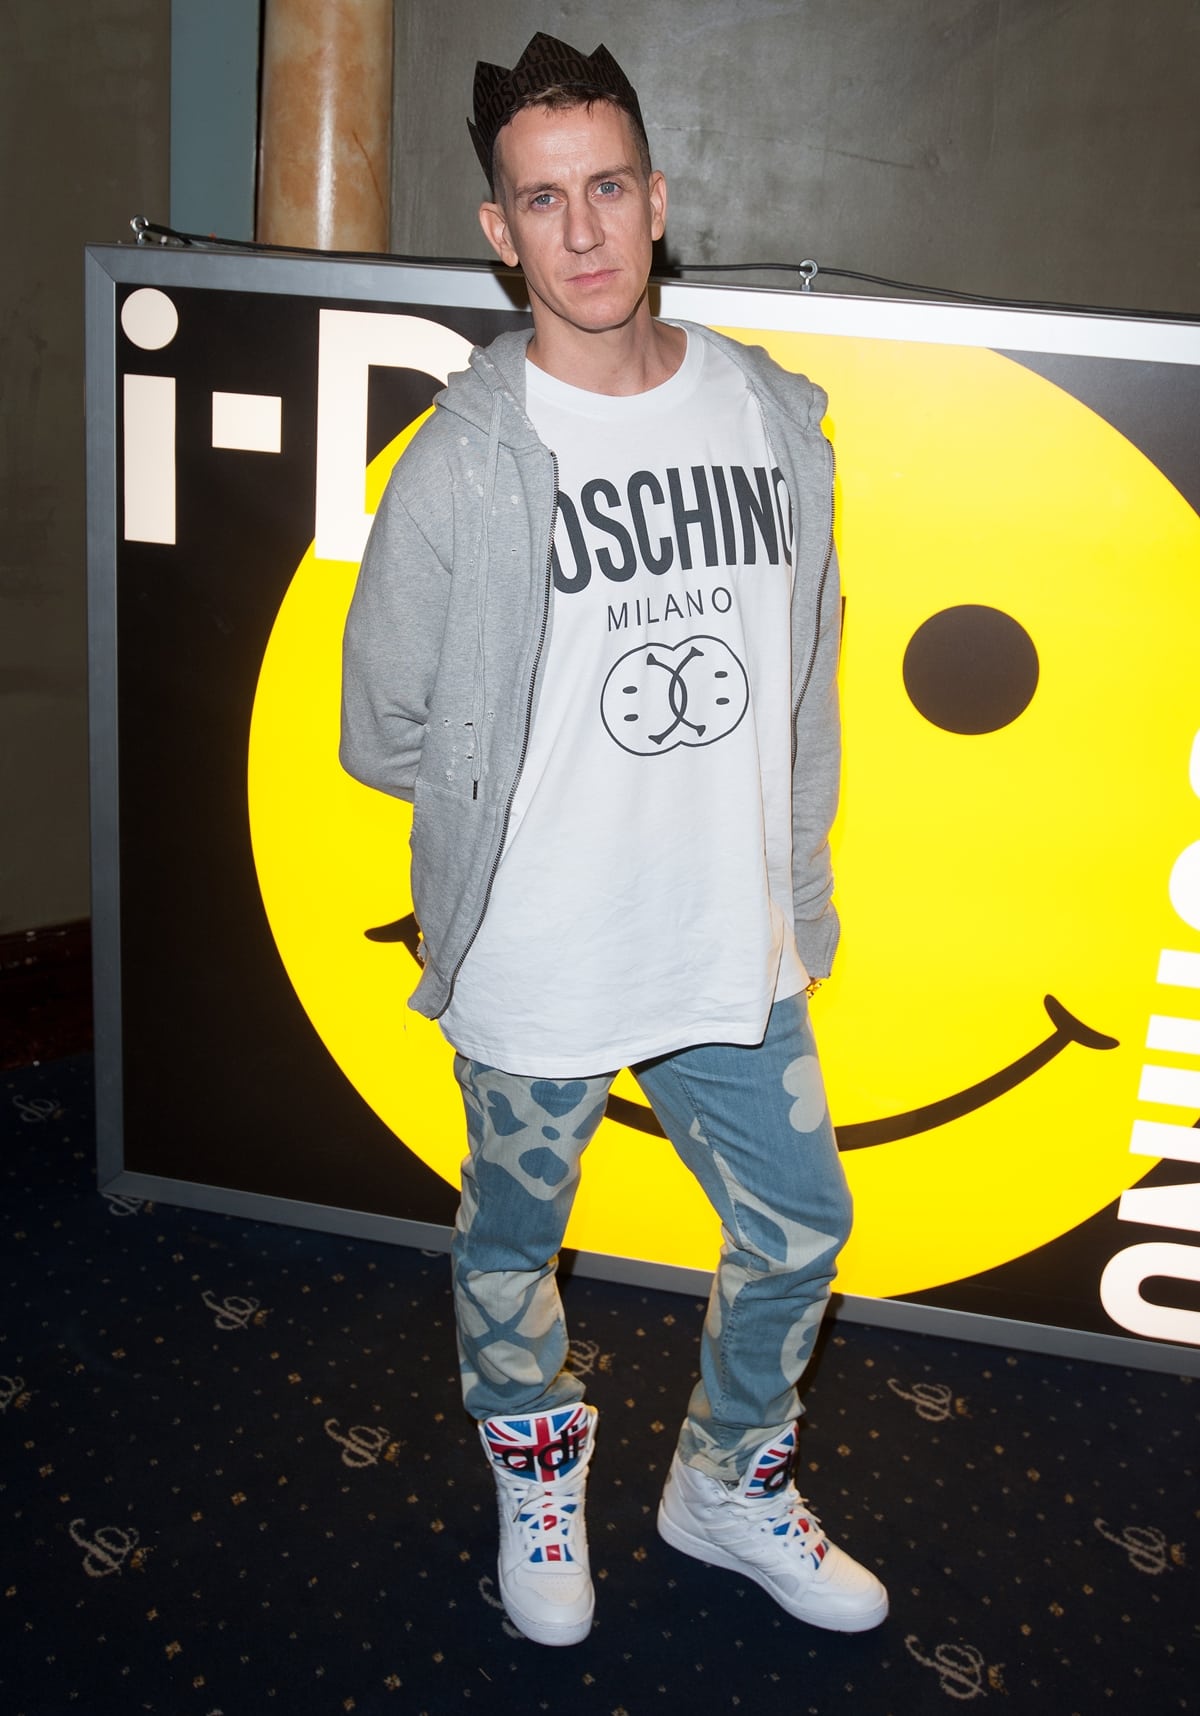 L.A.-based designer Jeremy Scott was appointed creative director of Italian fashion brand Moschino in 2013